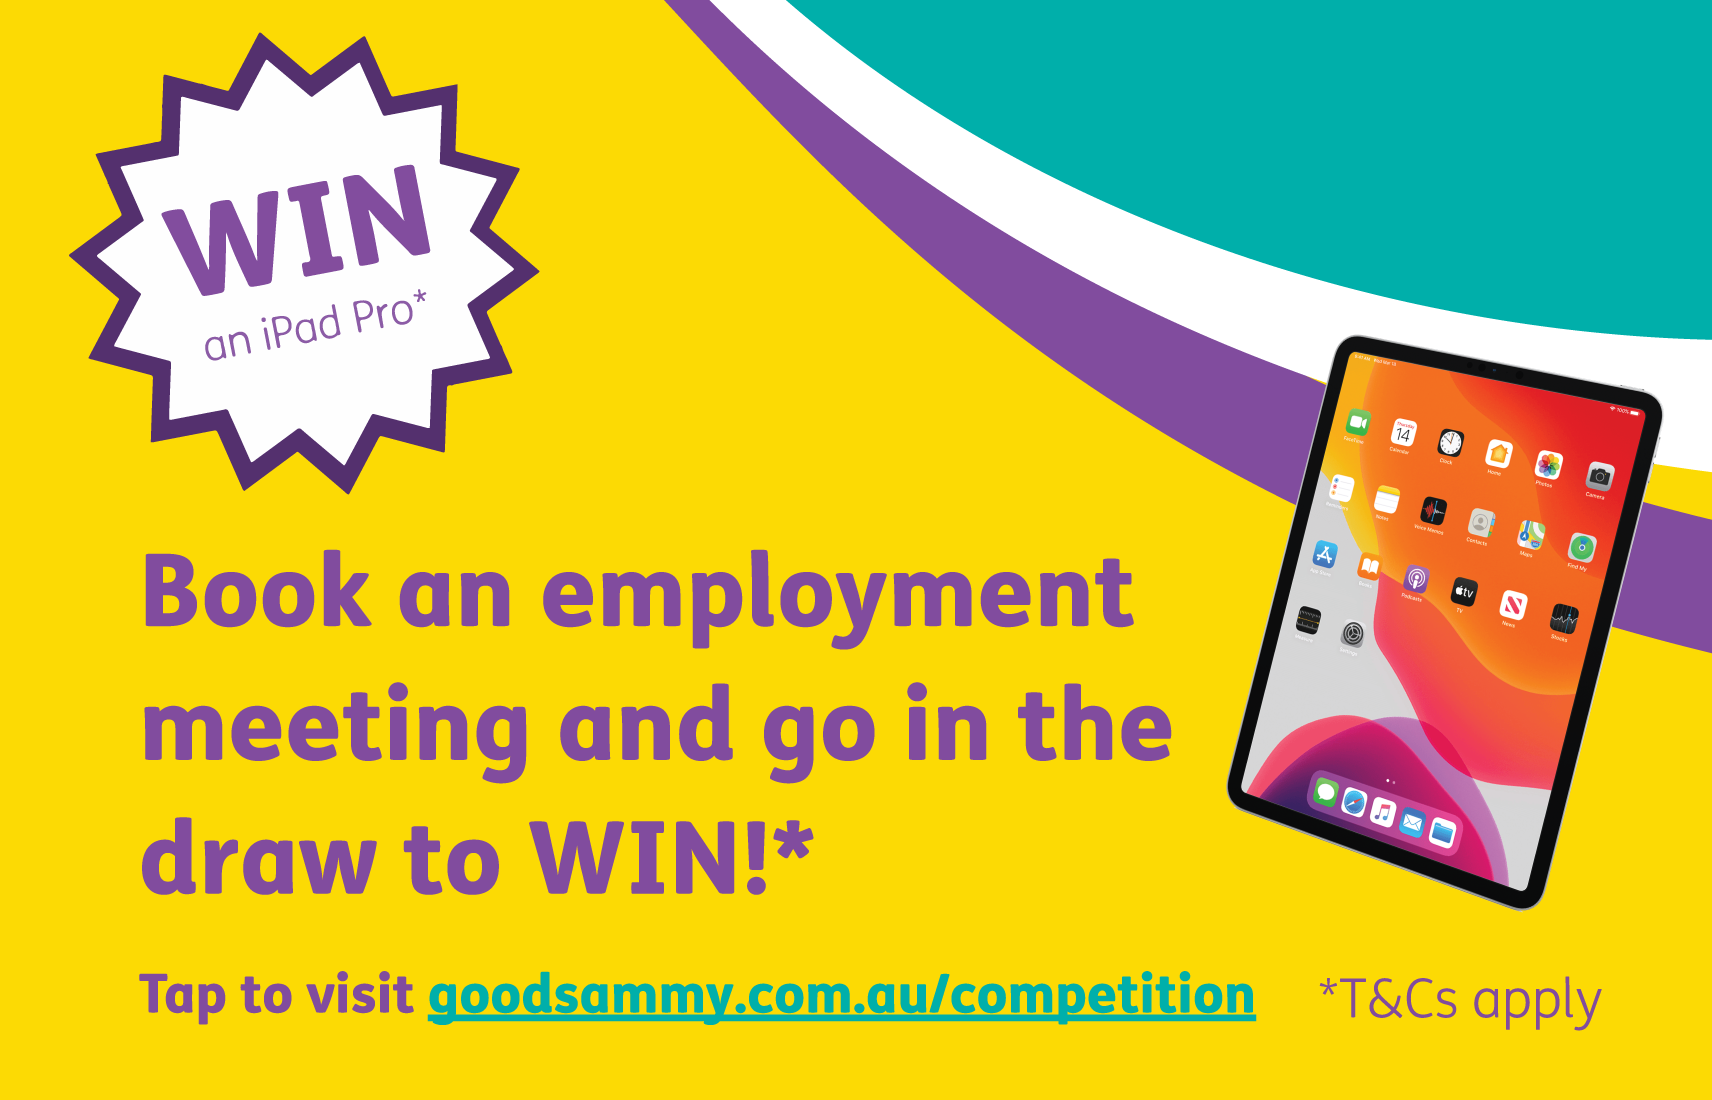 Win an ipad pro. Book an employment meeting with us and go in the draw to win. T&Cs apply. Click the banner or visit goodsammy.com.au/competition